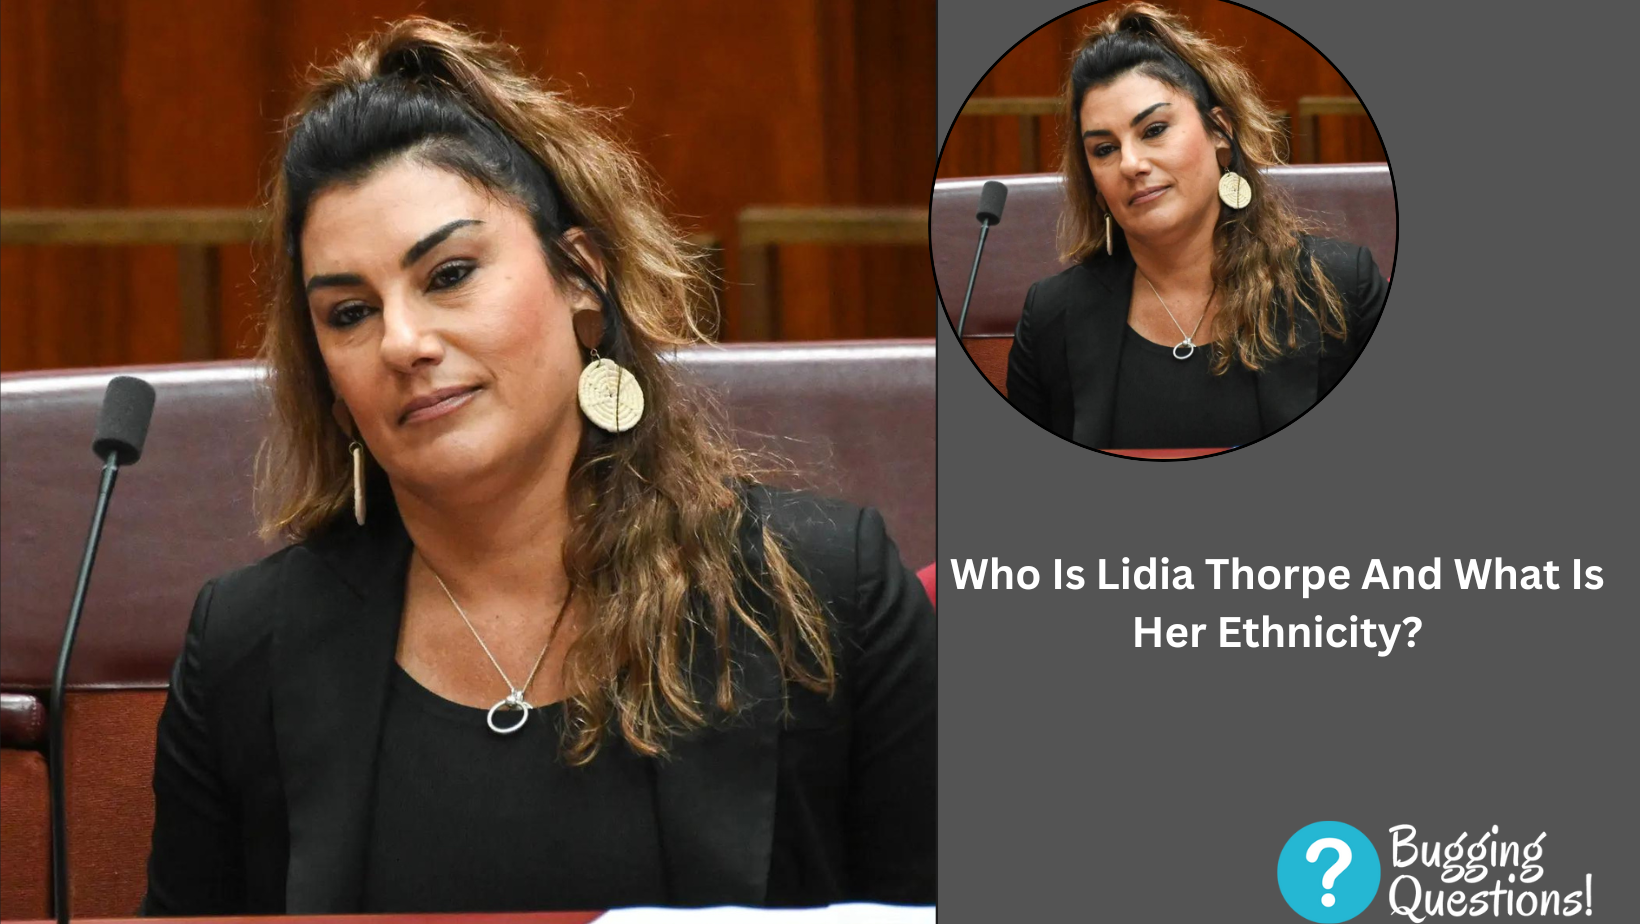 Who Is Lidia Thorpe And What Is Her Ethnicity?